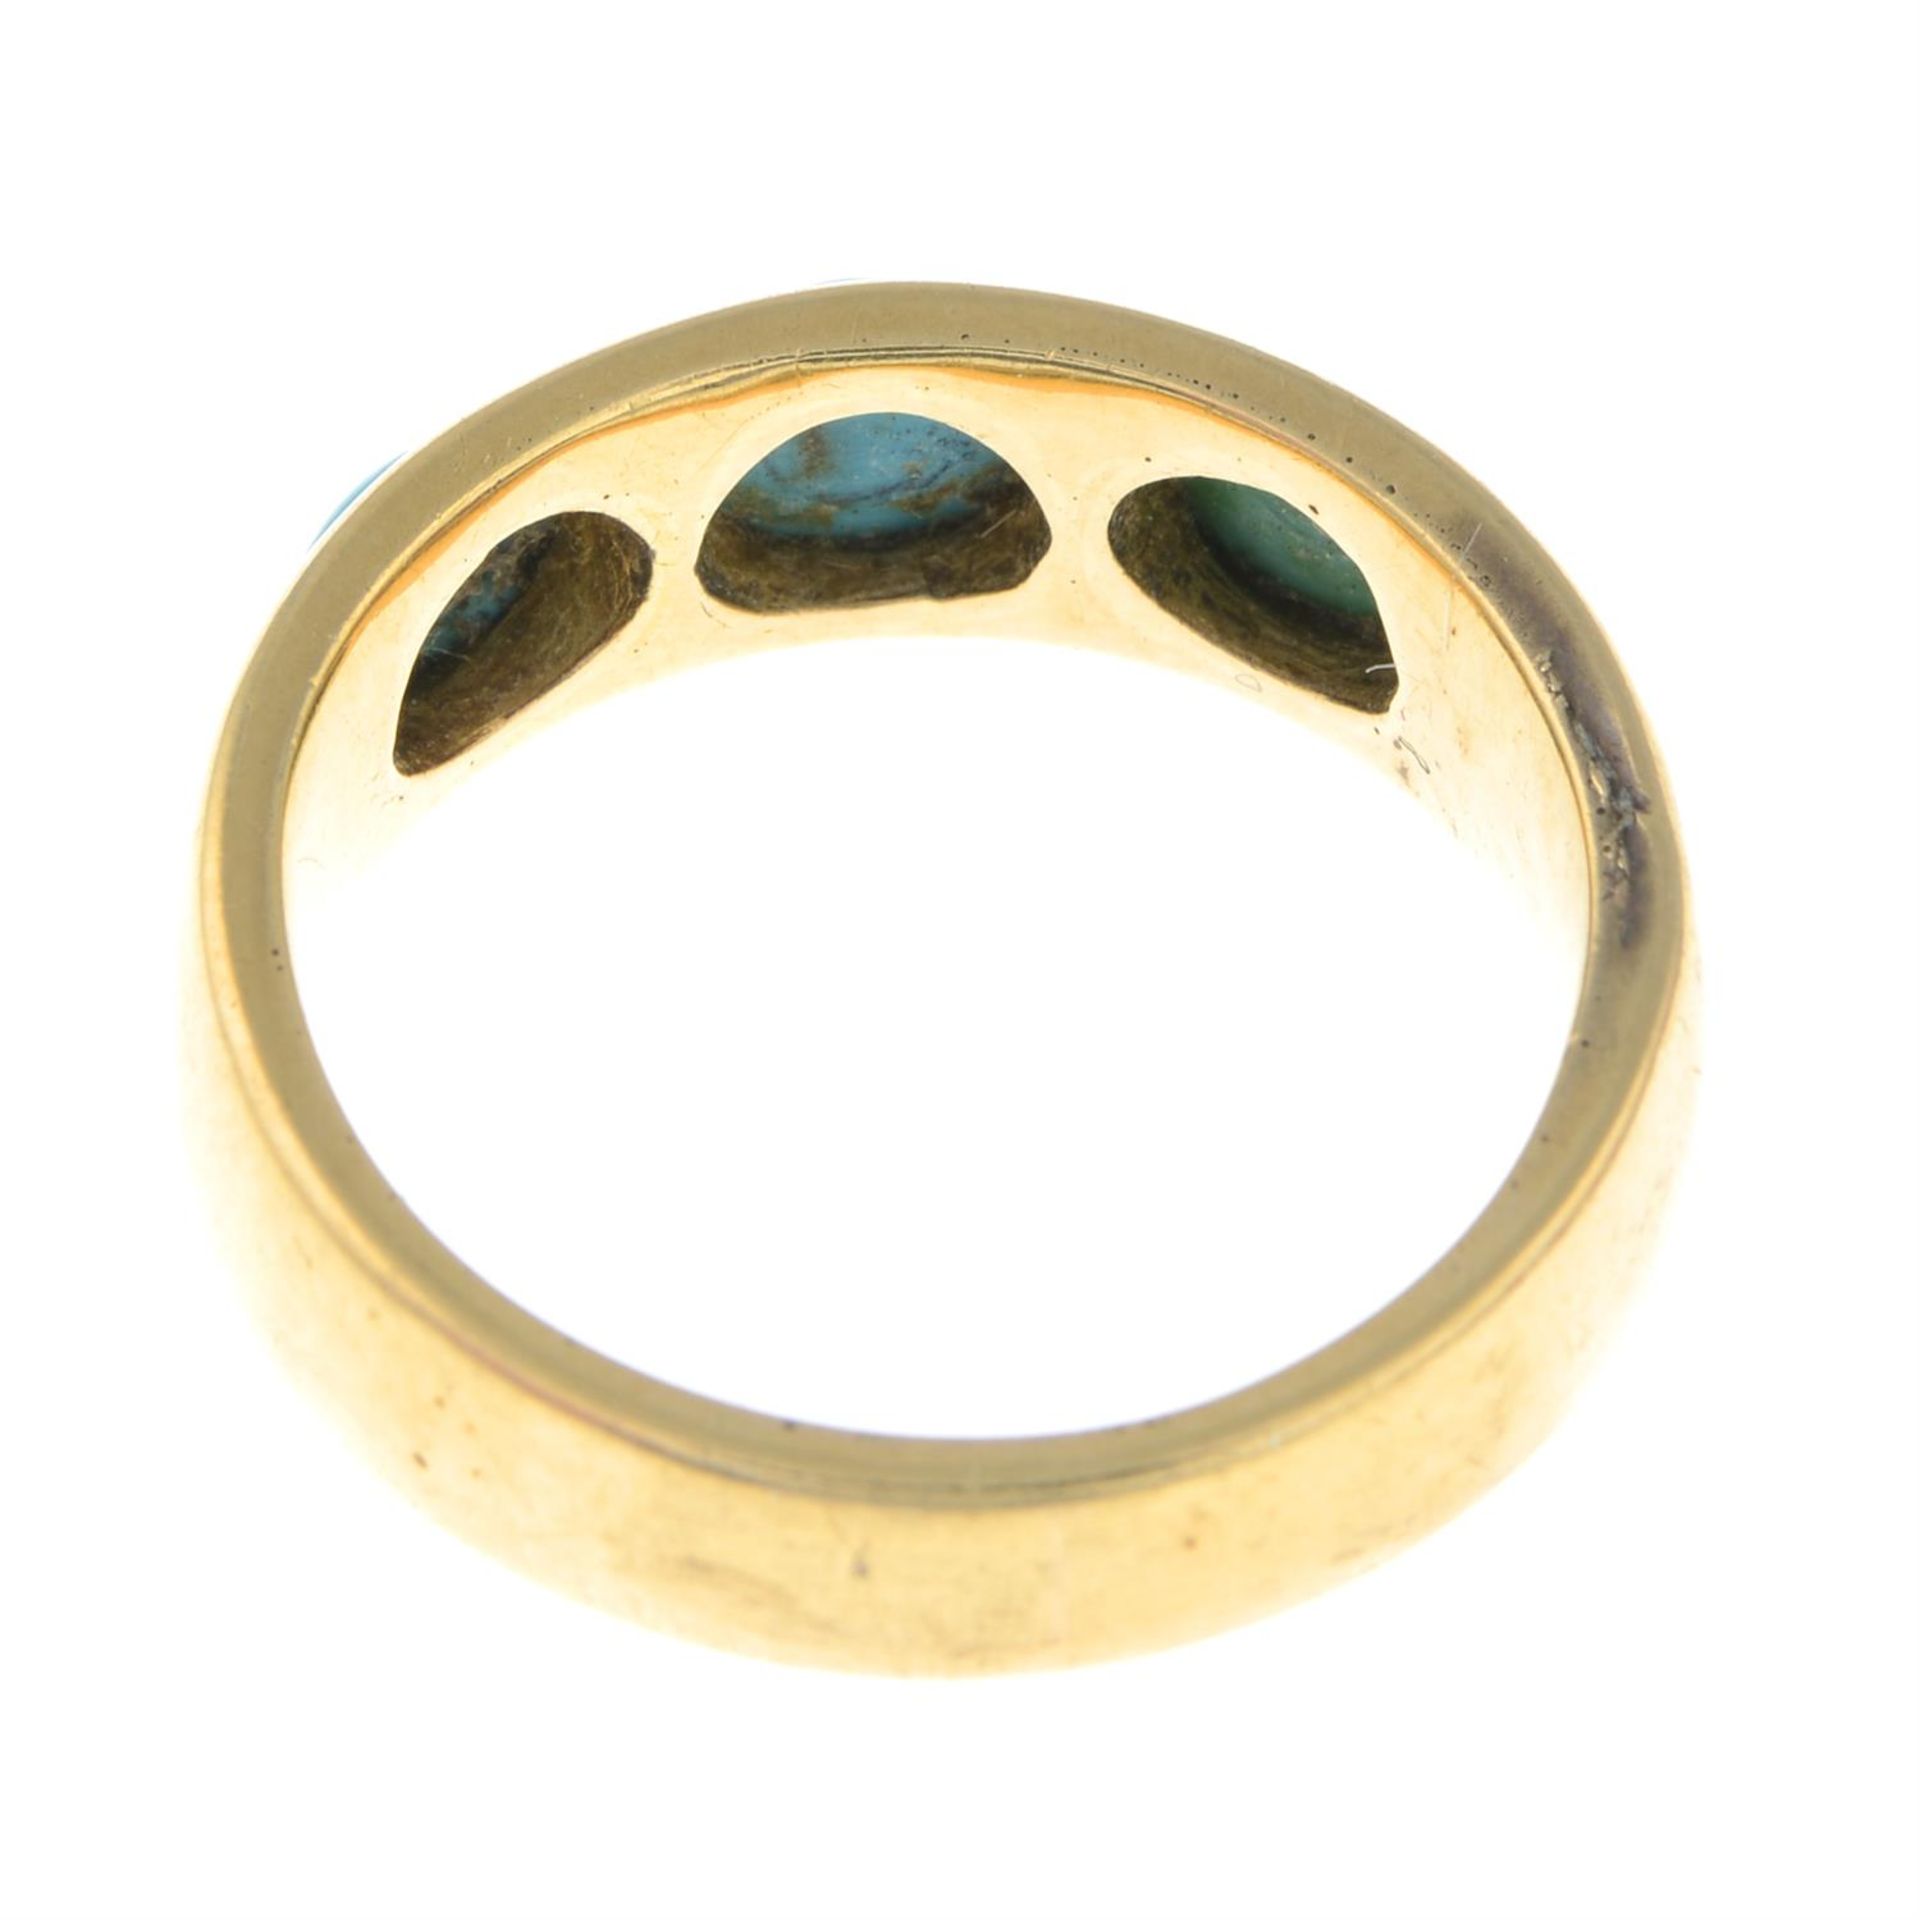 A turquoise three-stone ring. - Image 2 of 2